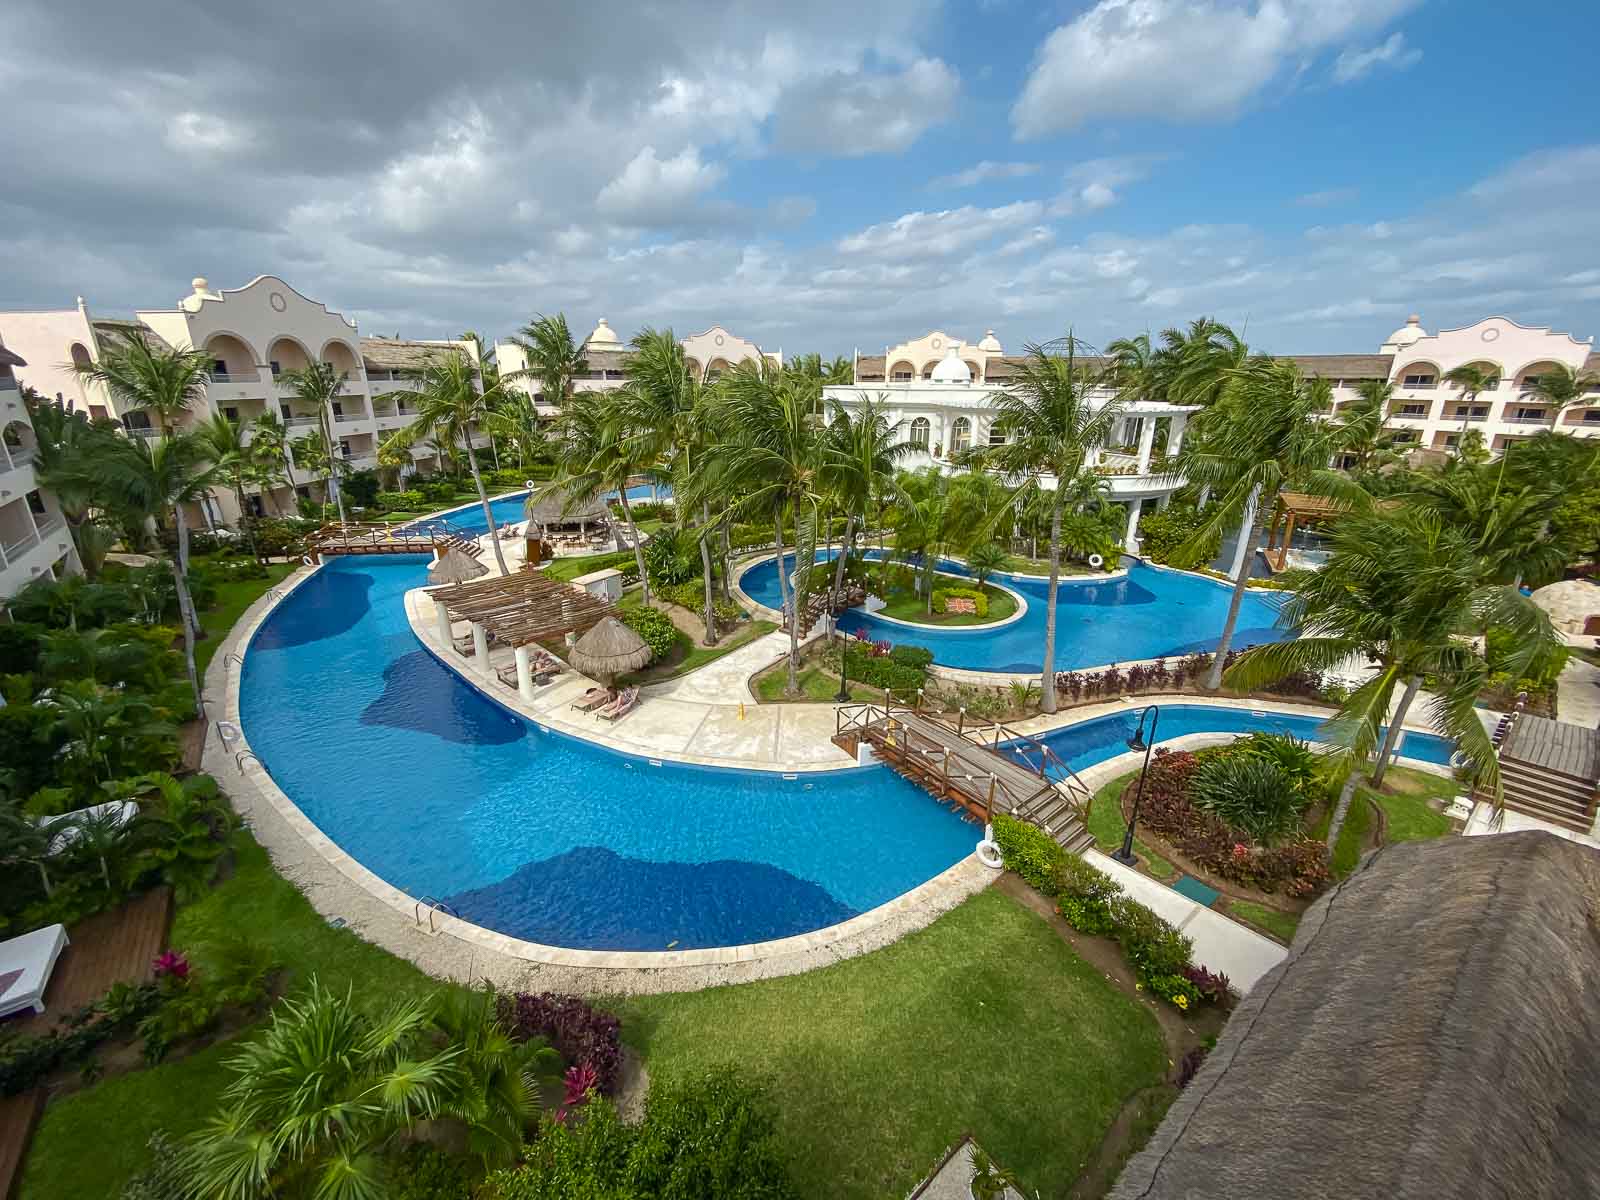 Where to stay in Cancun For the First Time